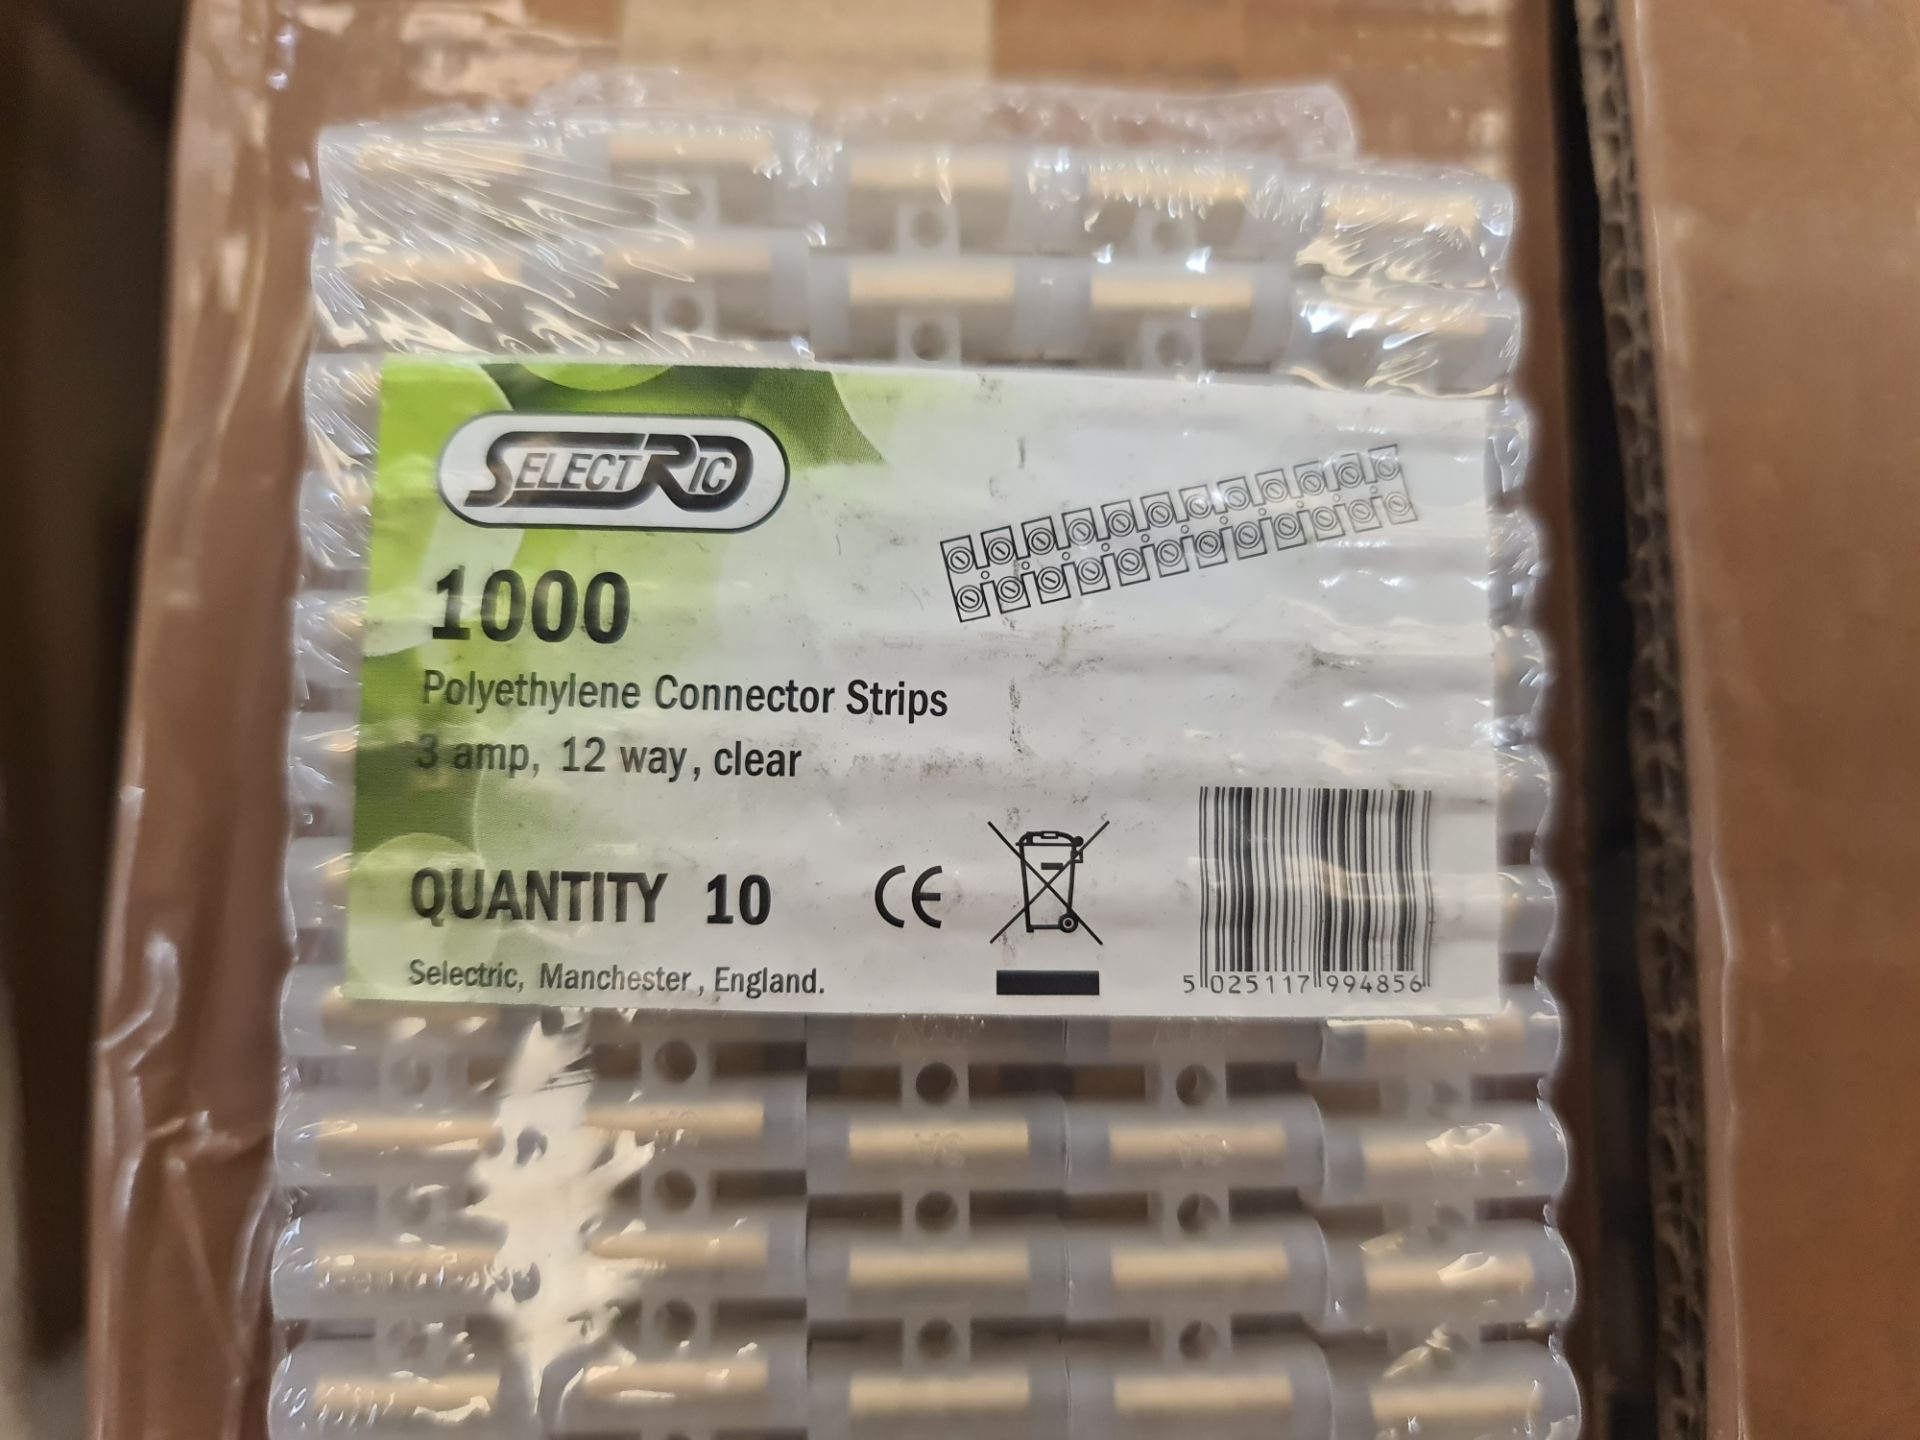 3 boxes of cable connection strips